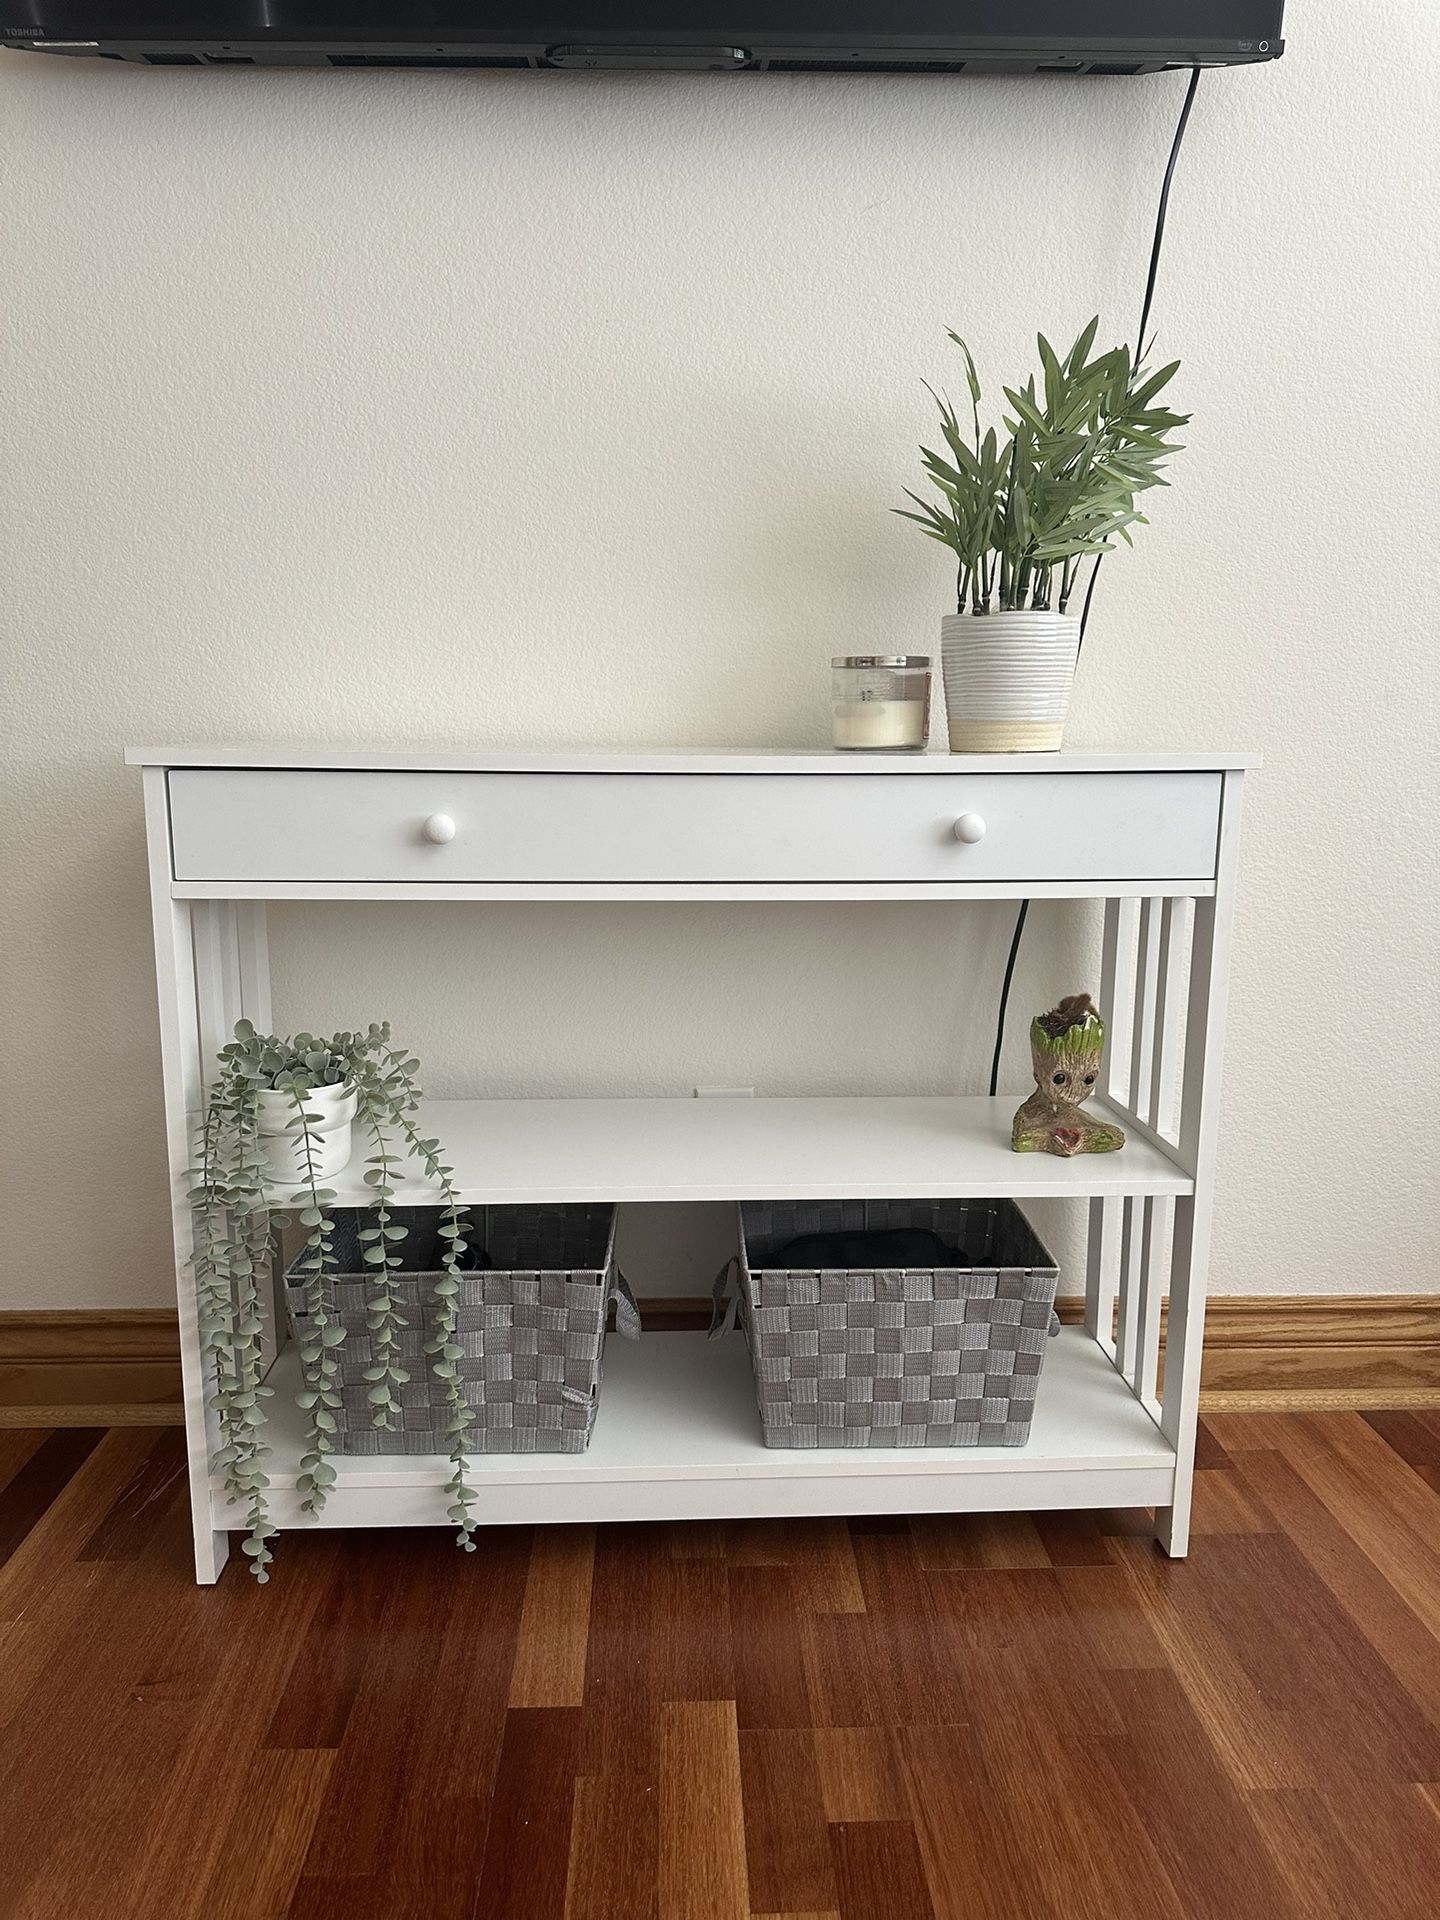 Console Table, Tv Stand, Hall Table